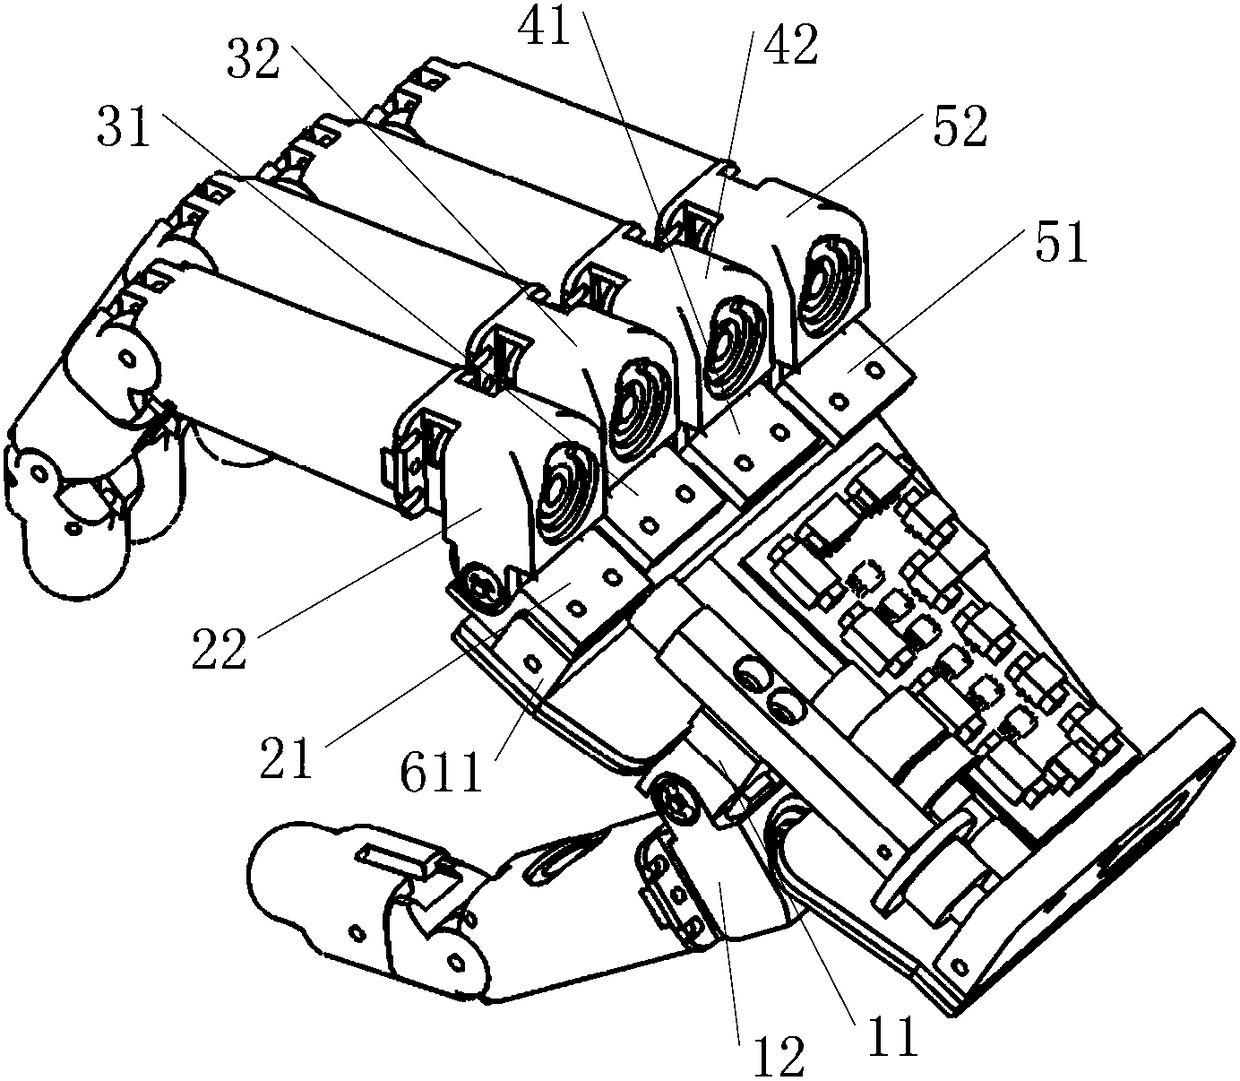 Underactuated lightweight human-simulated five-finger dexterous hand